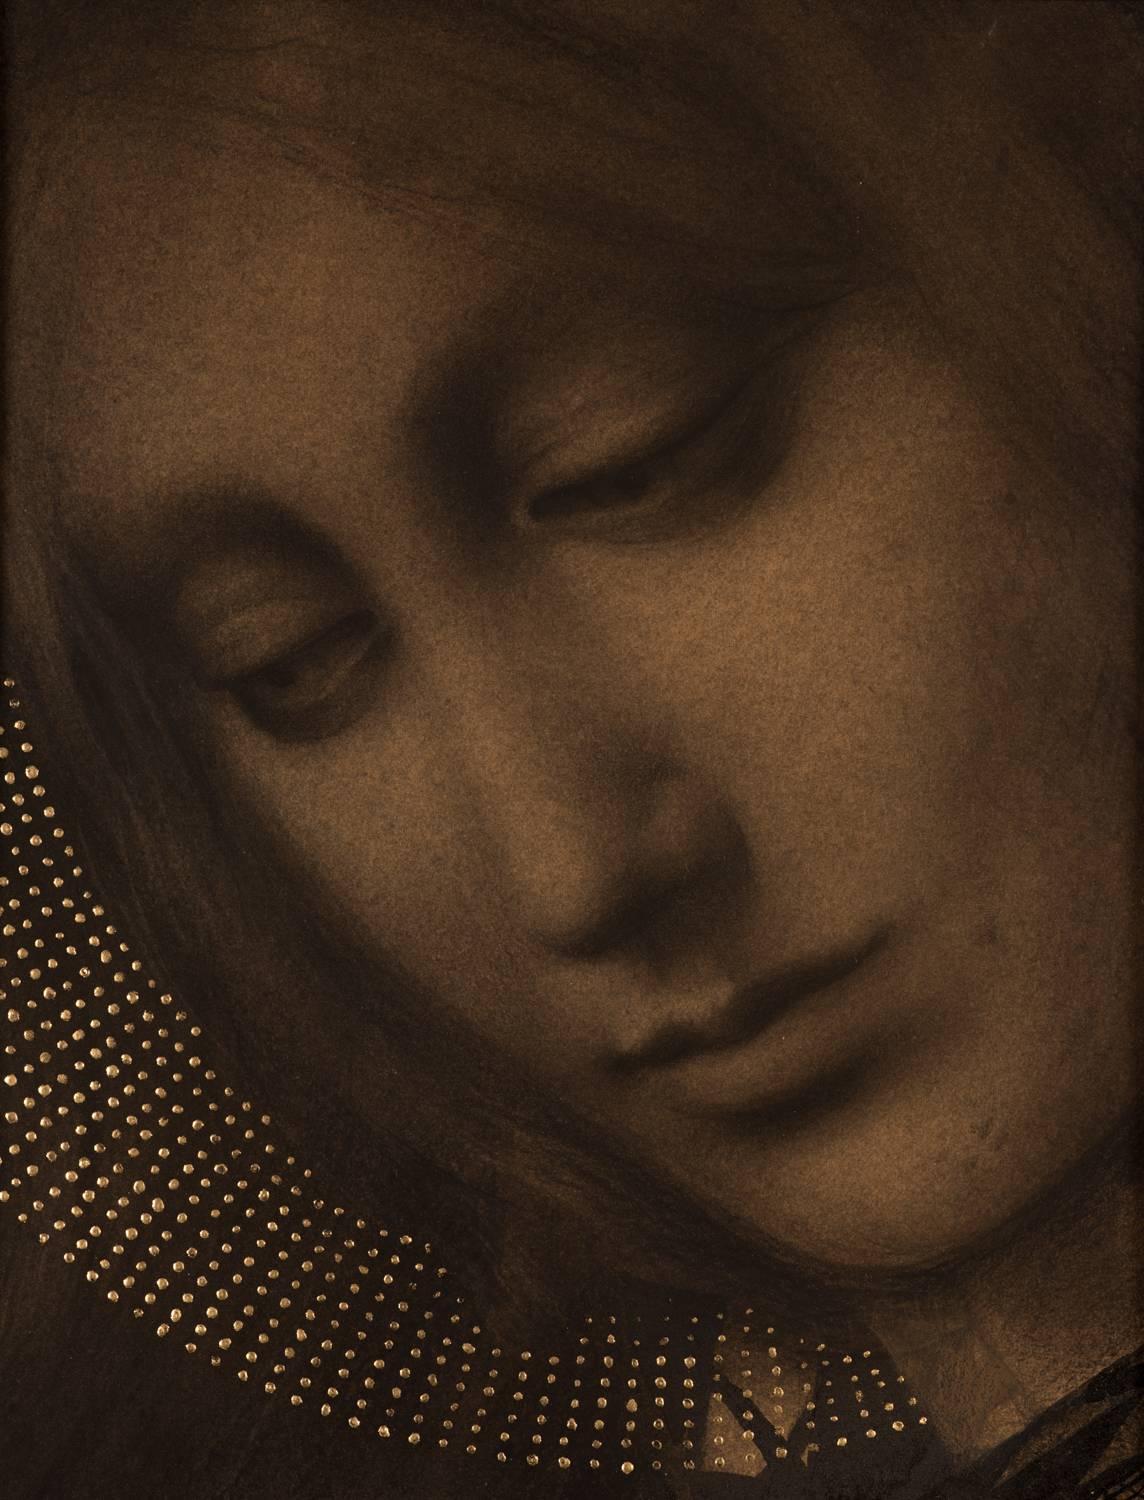 Alessandra Maria Portrait - "Contemplation of the Approach" Symbolist Drawing with Gold-Leaf